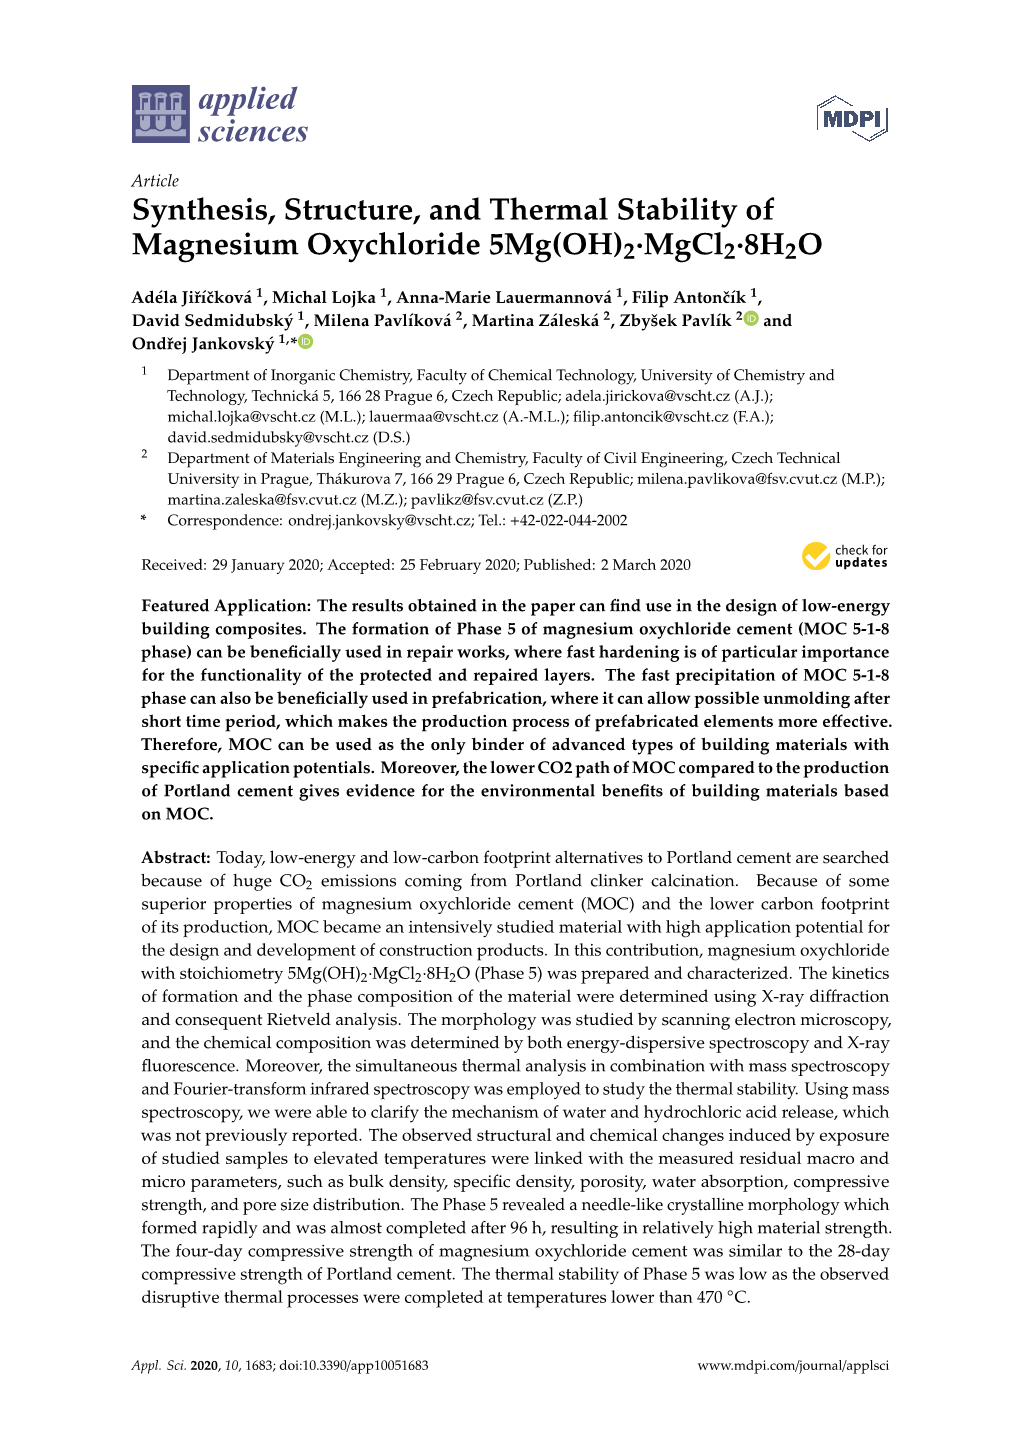 Synthesis, Structure, and Thermal Stability of Magnesium Oxychloride 5Mg(OH)2·Mgcl2·8H2O